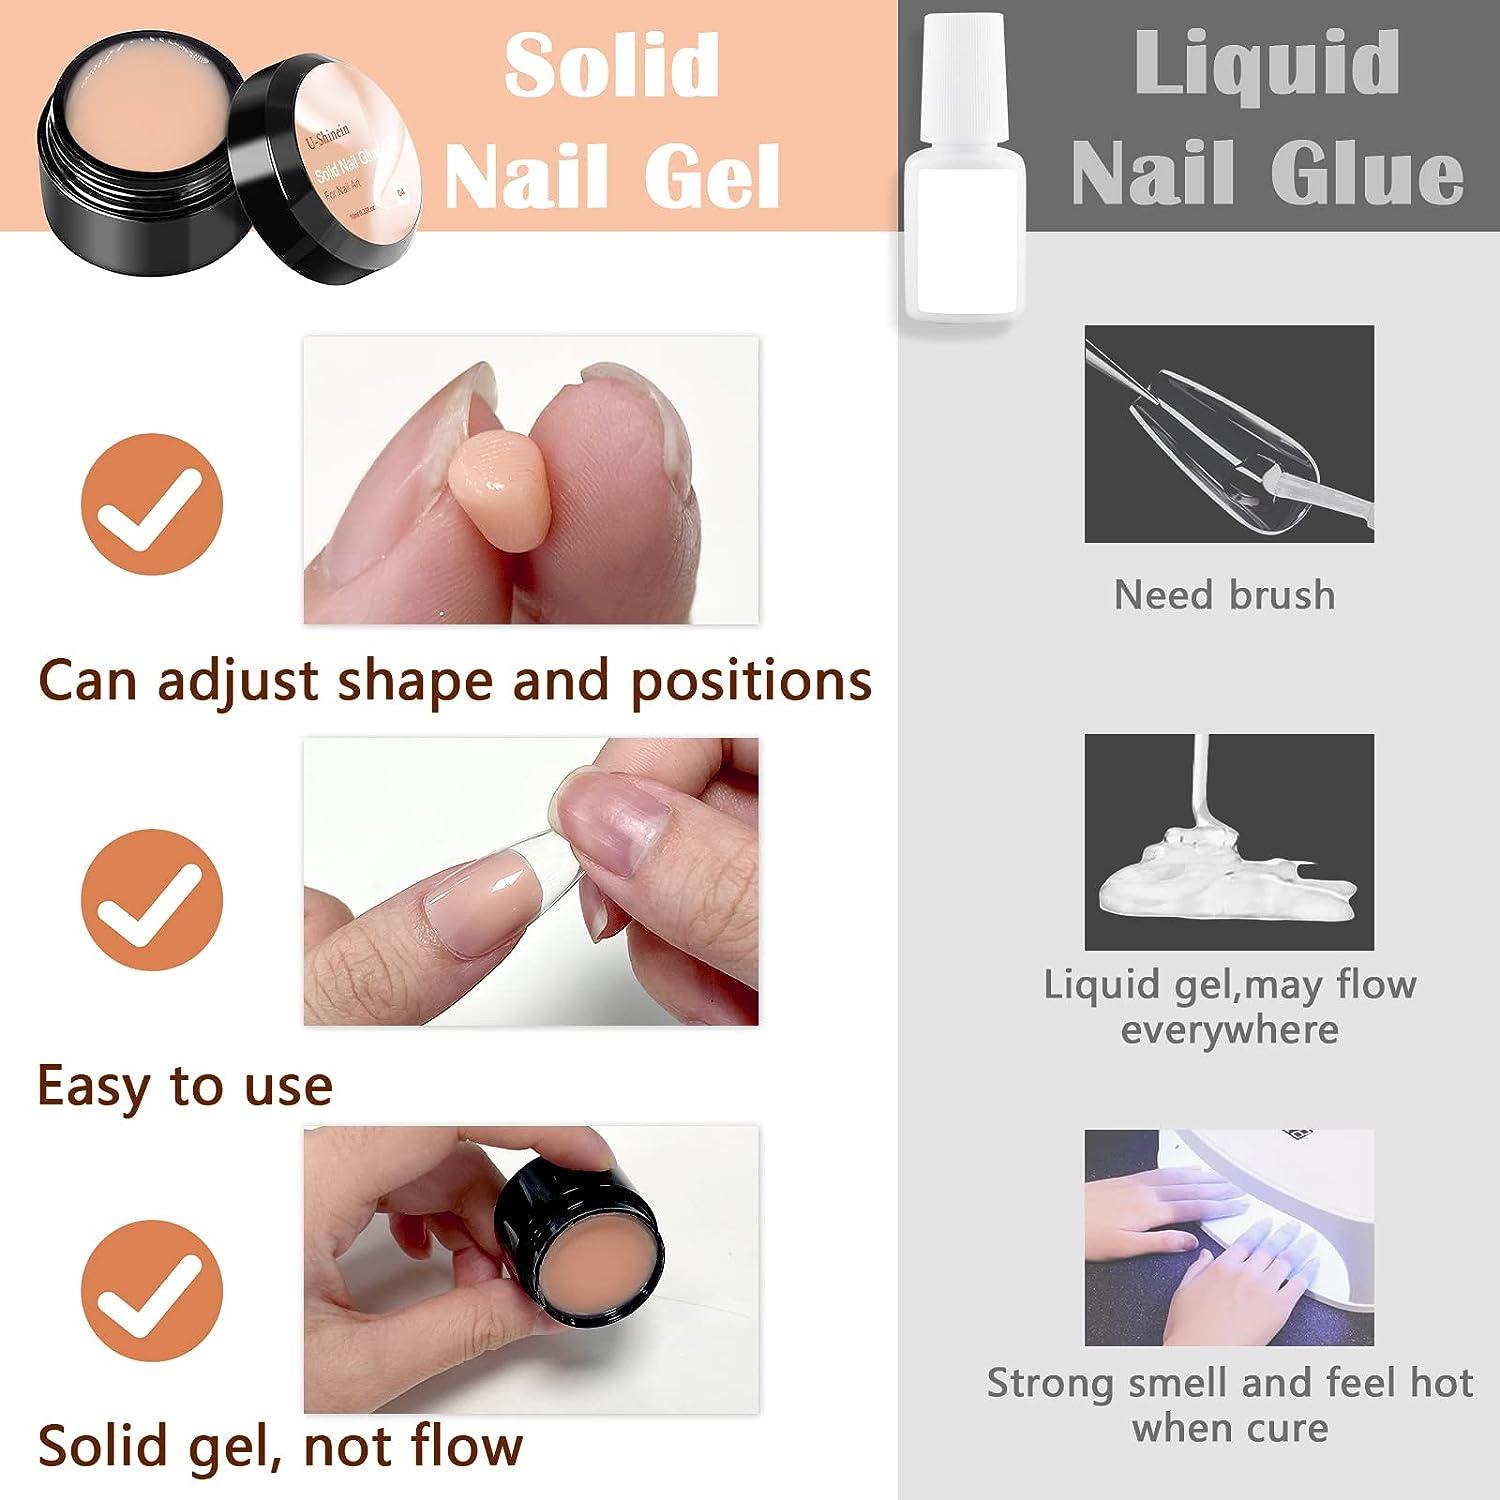 U-Shinein 3x10ml Solid Nail Glue Gel Nail Tips Glue Gel for Acrylic Nails  Press on Solid Glue Gel Nail Art Manicure Glue Gel Need UV/LED Lamp Longer  Cure (Clear Nude Pink) Color